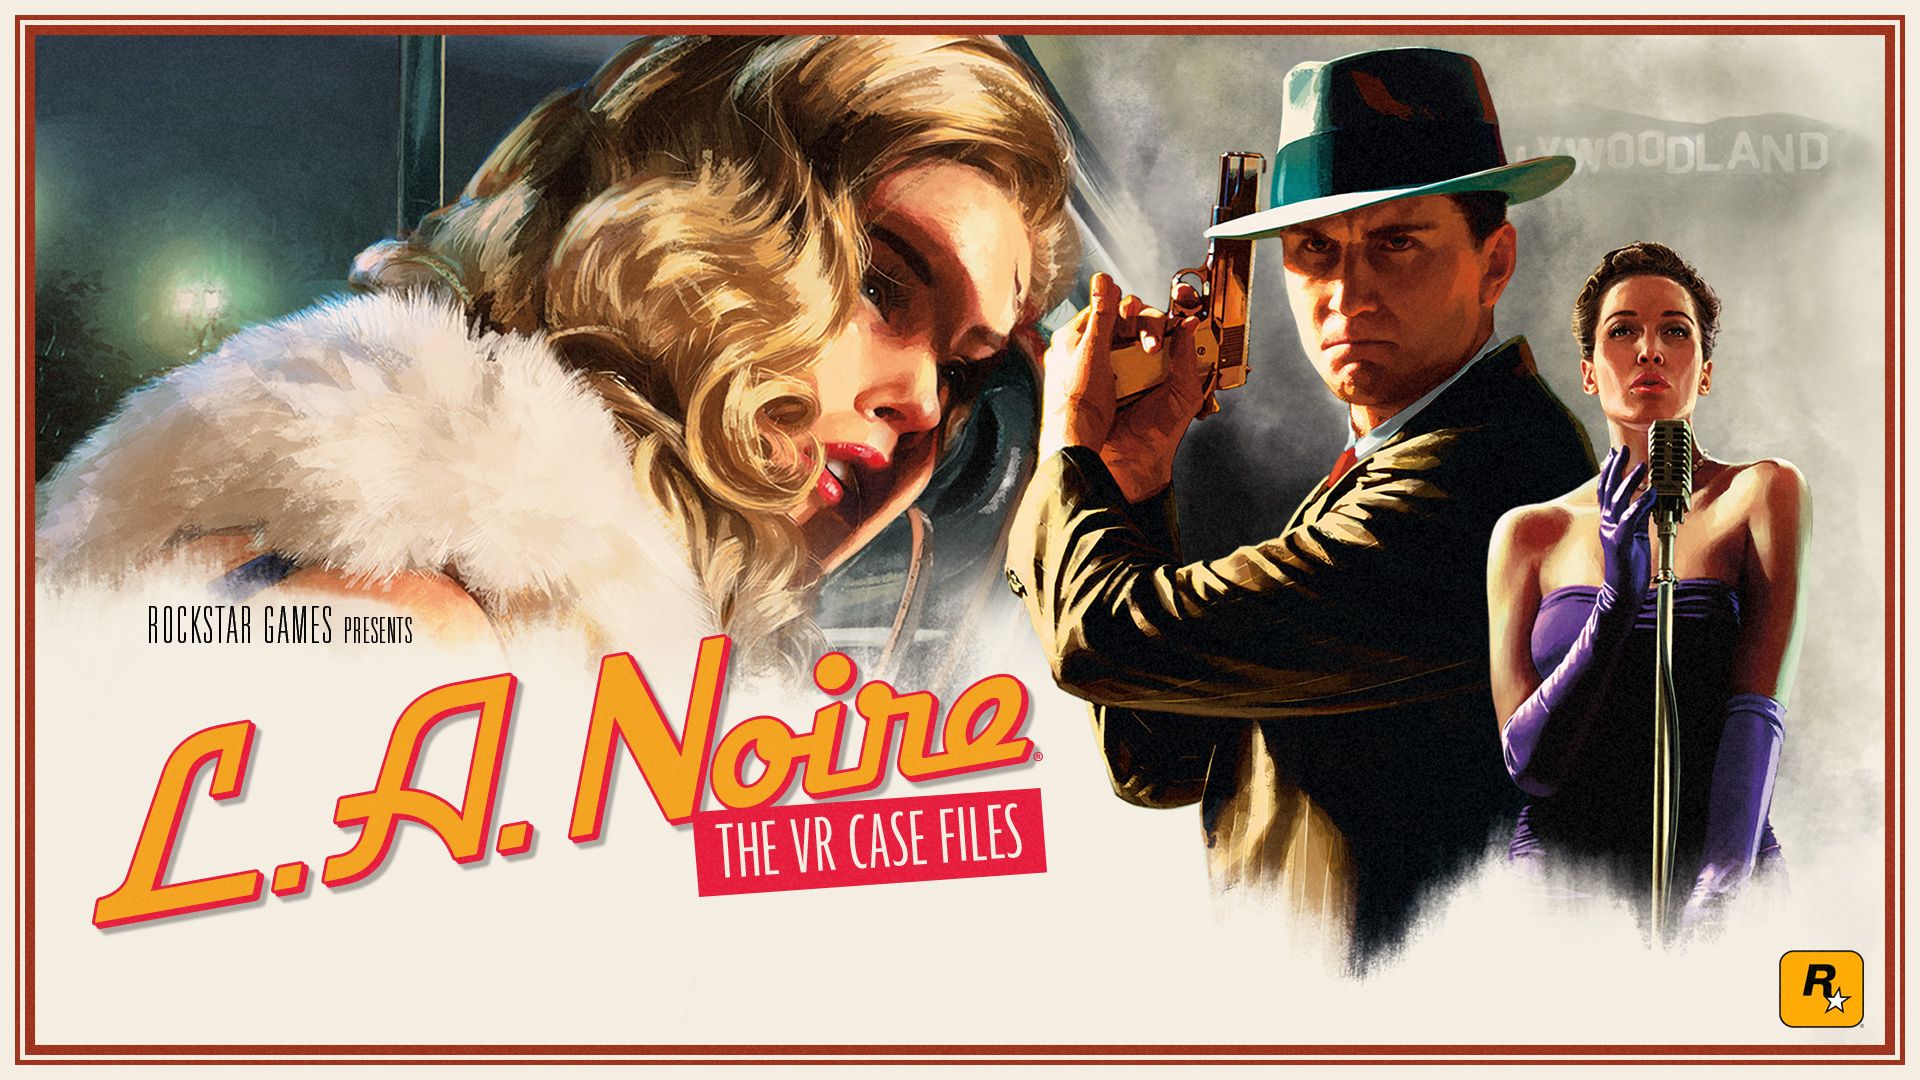 L.A. Noire VR from Rockstar Games